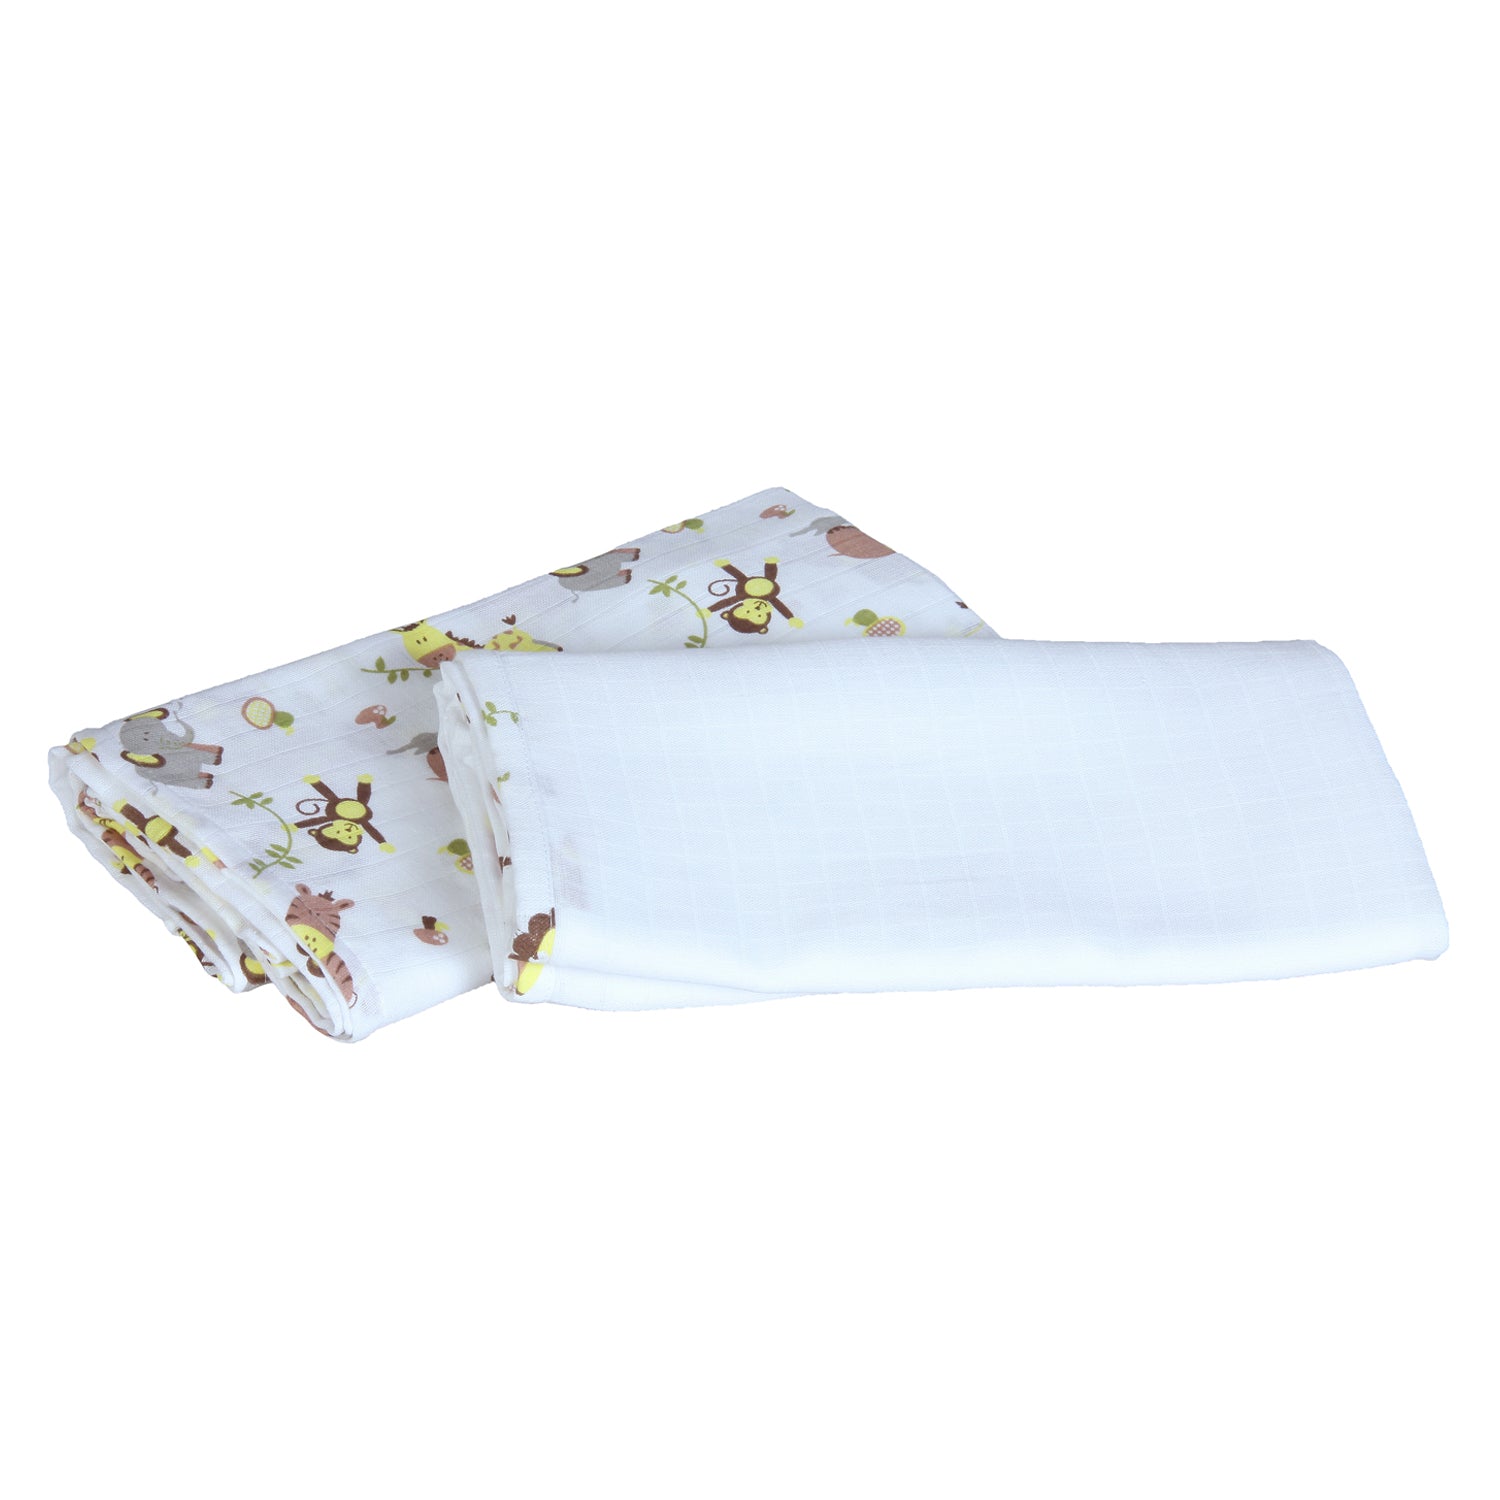 My Milestones 100% Cotton 3 in 1 Muslin Double Cloth (2 Layers) Baby Swaddle Wrapper - Pack Of 2 - Zoo Print Lemon Yellow